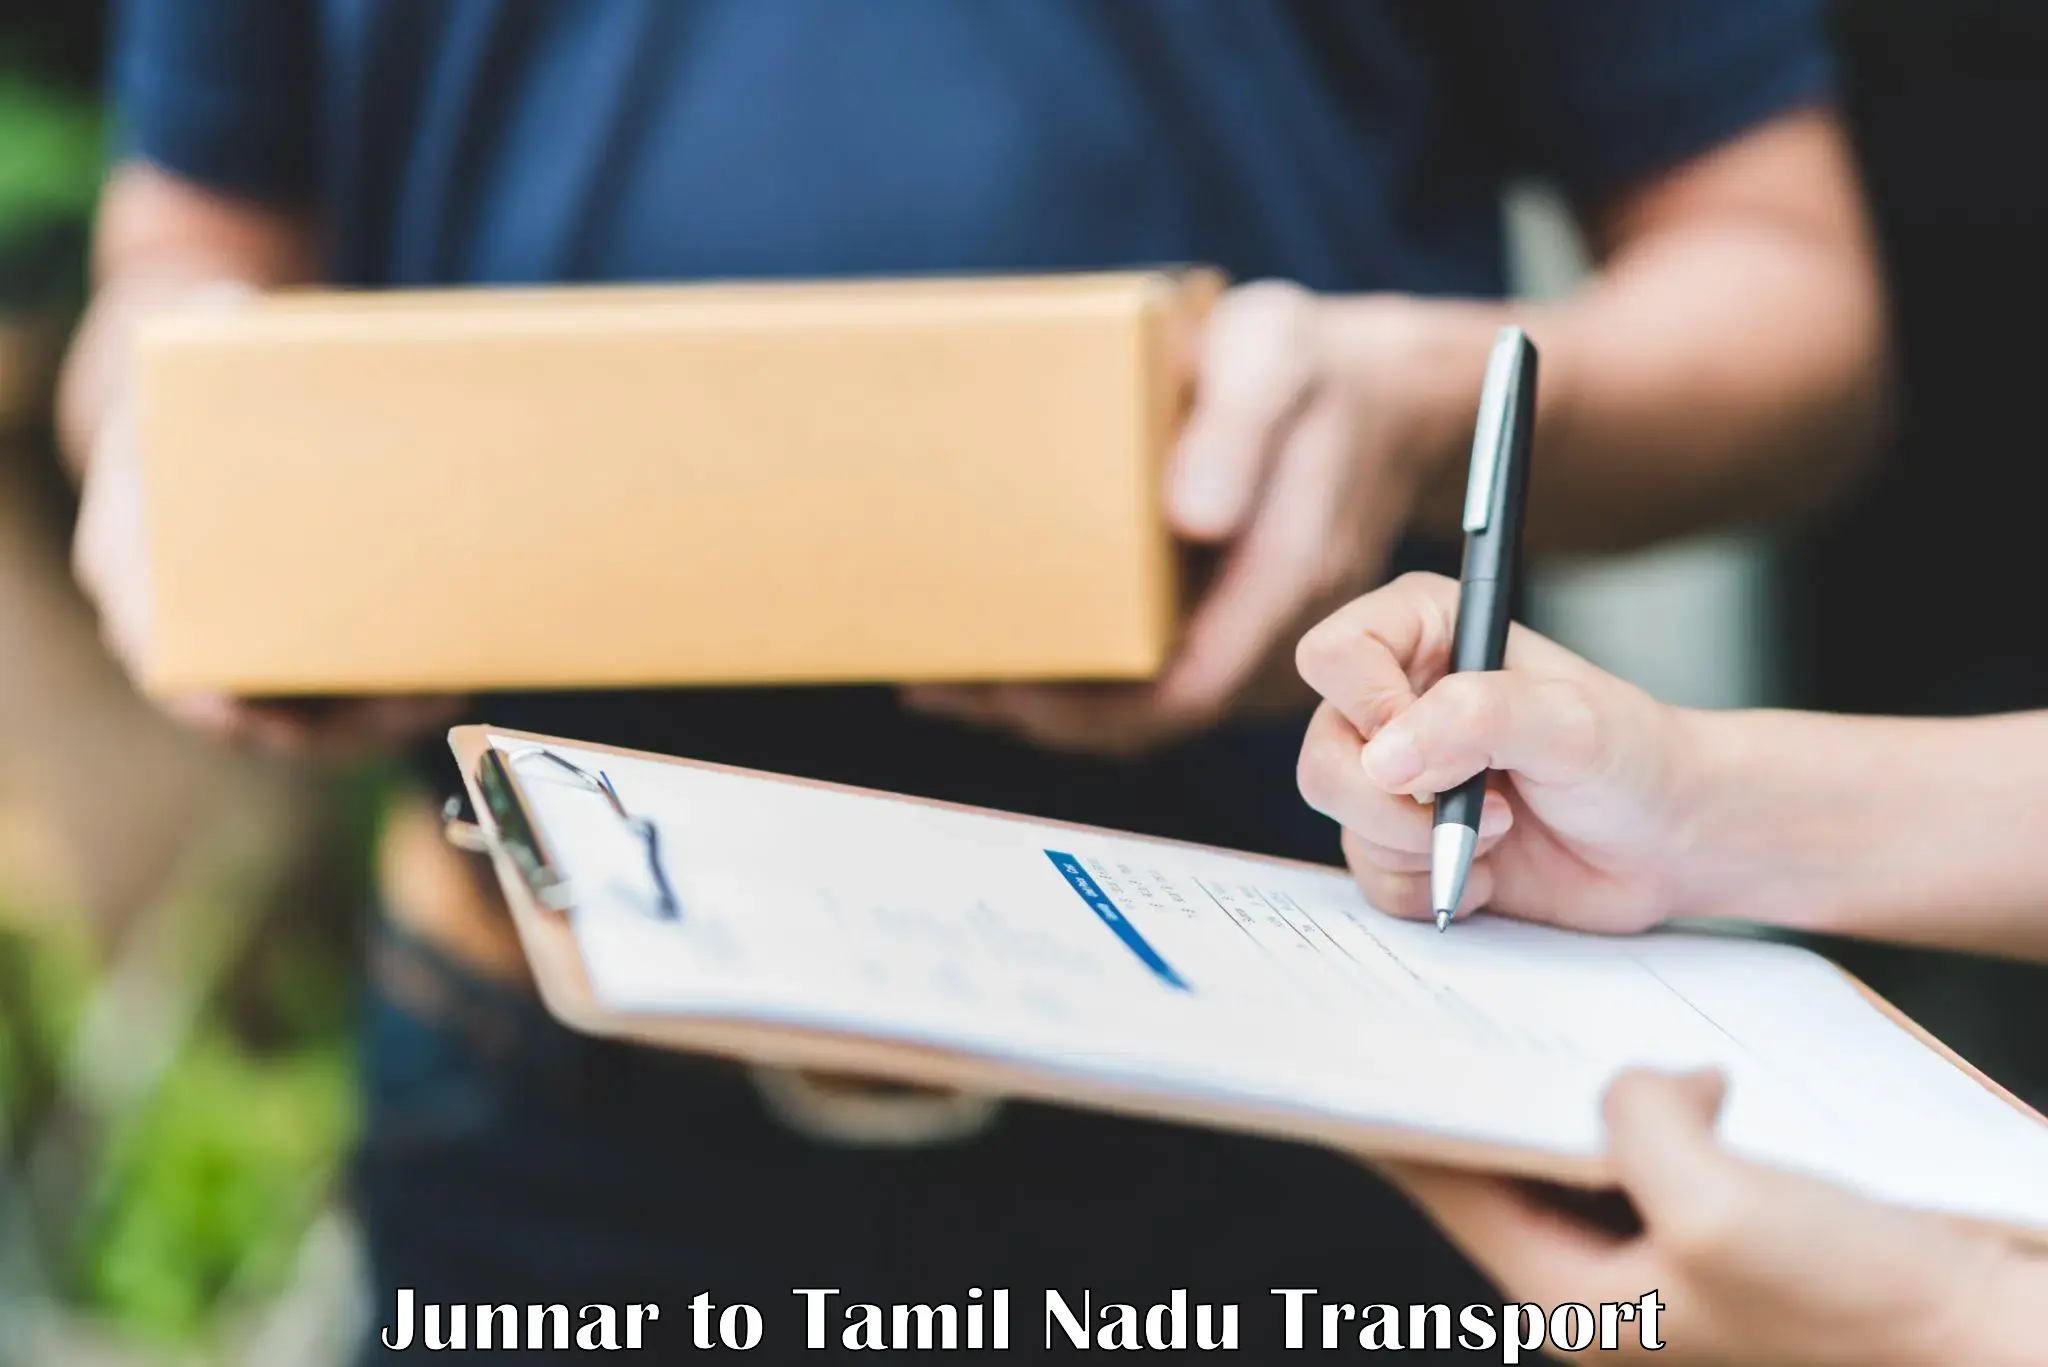 Container transport service Junnar to Padi